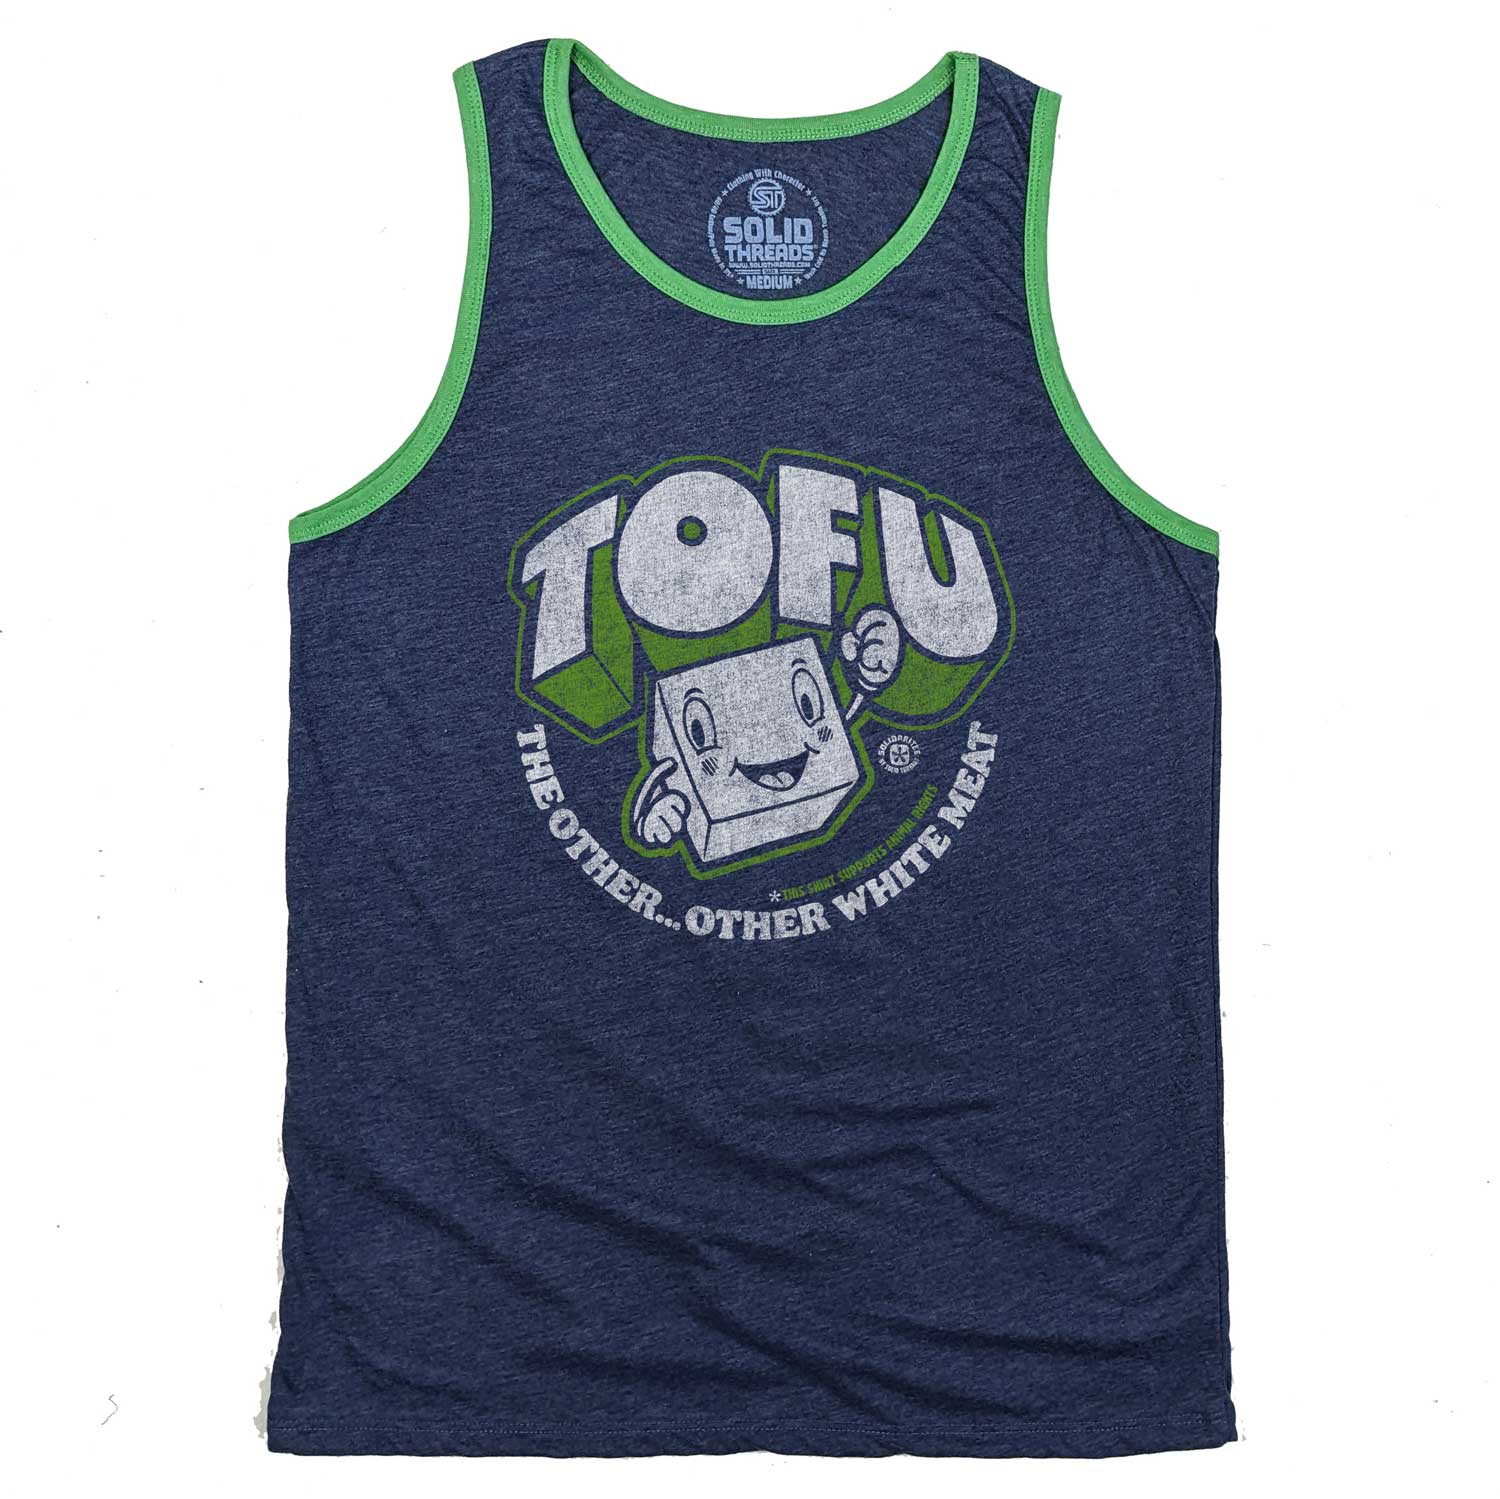 Men's Tofu, The Other Other White Meat Vintage Graphic Tank Top | Cool Animal Rights T-shirt | Solid Threads